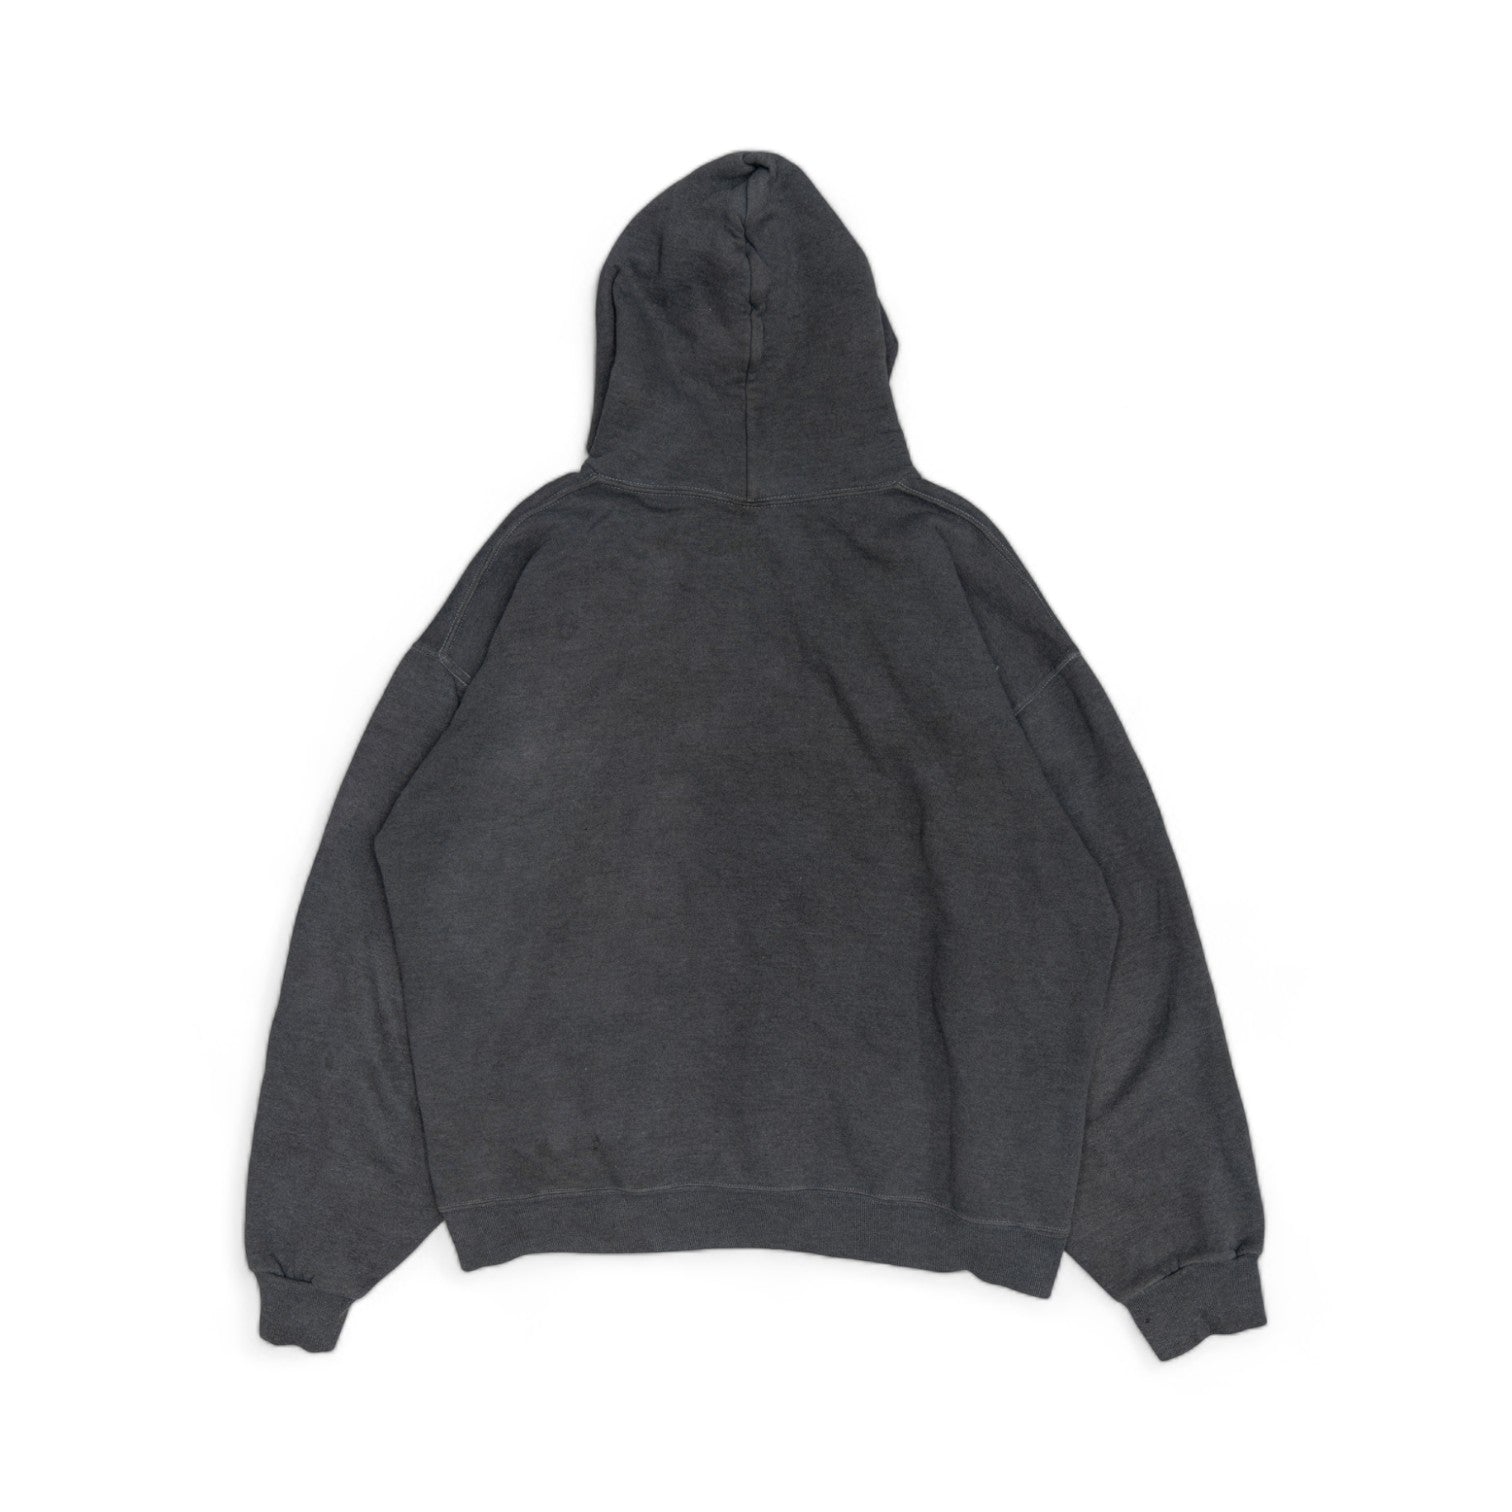 OVERDYED RUSSELL ATHLETIC HOODIE - 2000'S